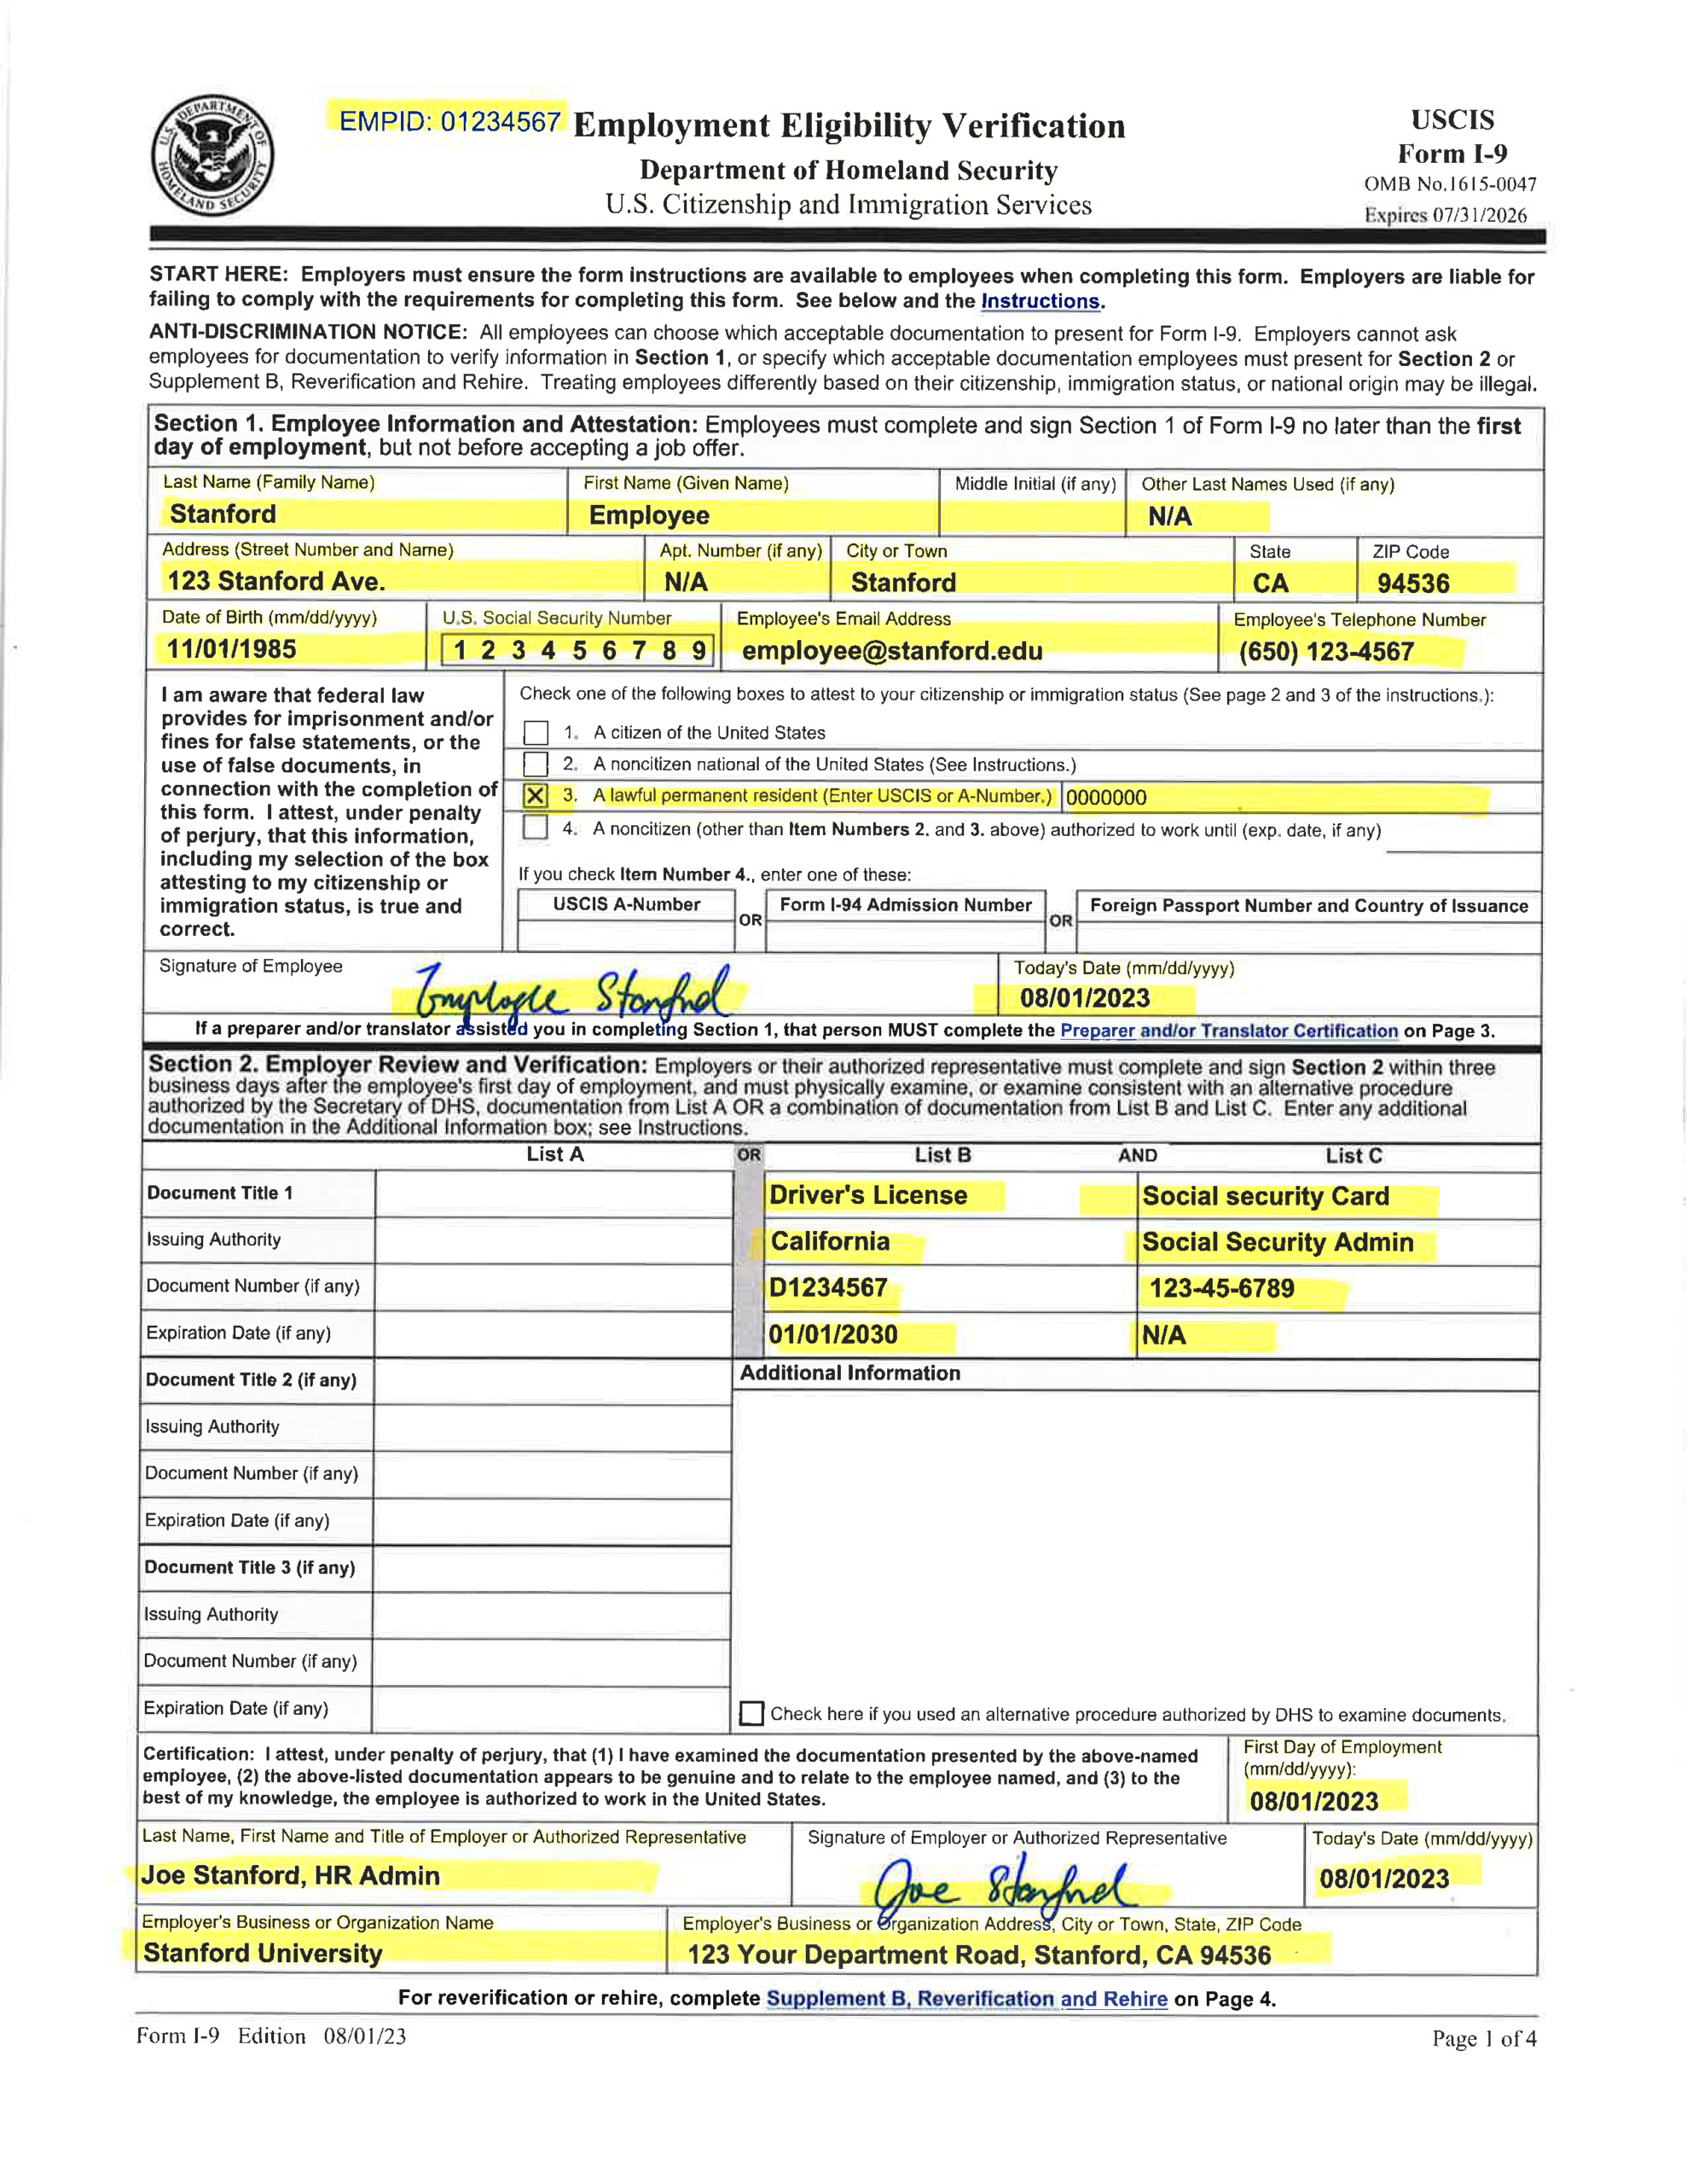 Examples Of Completed Form I-9 For Stanford with Uscis I-9 Form